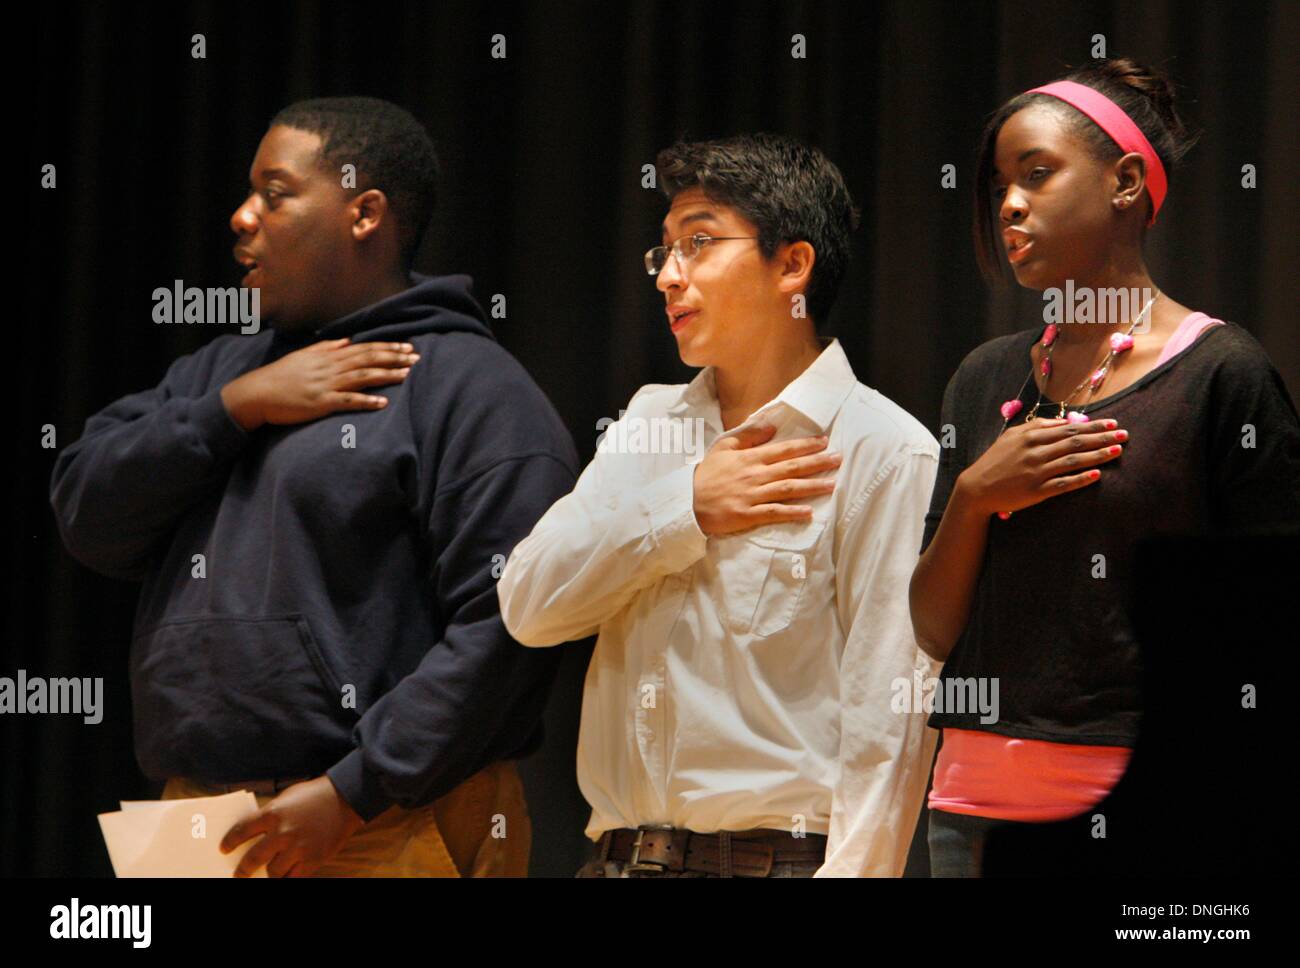 Memphis, Tennessee, USA. 26th Oct, 2012. October 26, 2012 - Isaias Ramos (center) recites the pledge of allegiance during a school program where he performed, playing piano. He was brought to America illegally at the age of eight from Mexico. In the last ten years he has learned to speak English fluently, and he has risen to the top of his class. He is not an American citizen, but he holds a work permit, social security card, and a temporary driver's license. He has qualified for a new legalization program for hispanics that were brought to America, as children. (Credit Image: © Karen Pu Stock Photo